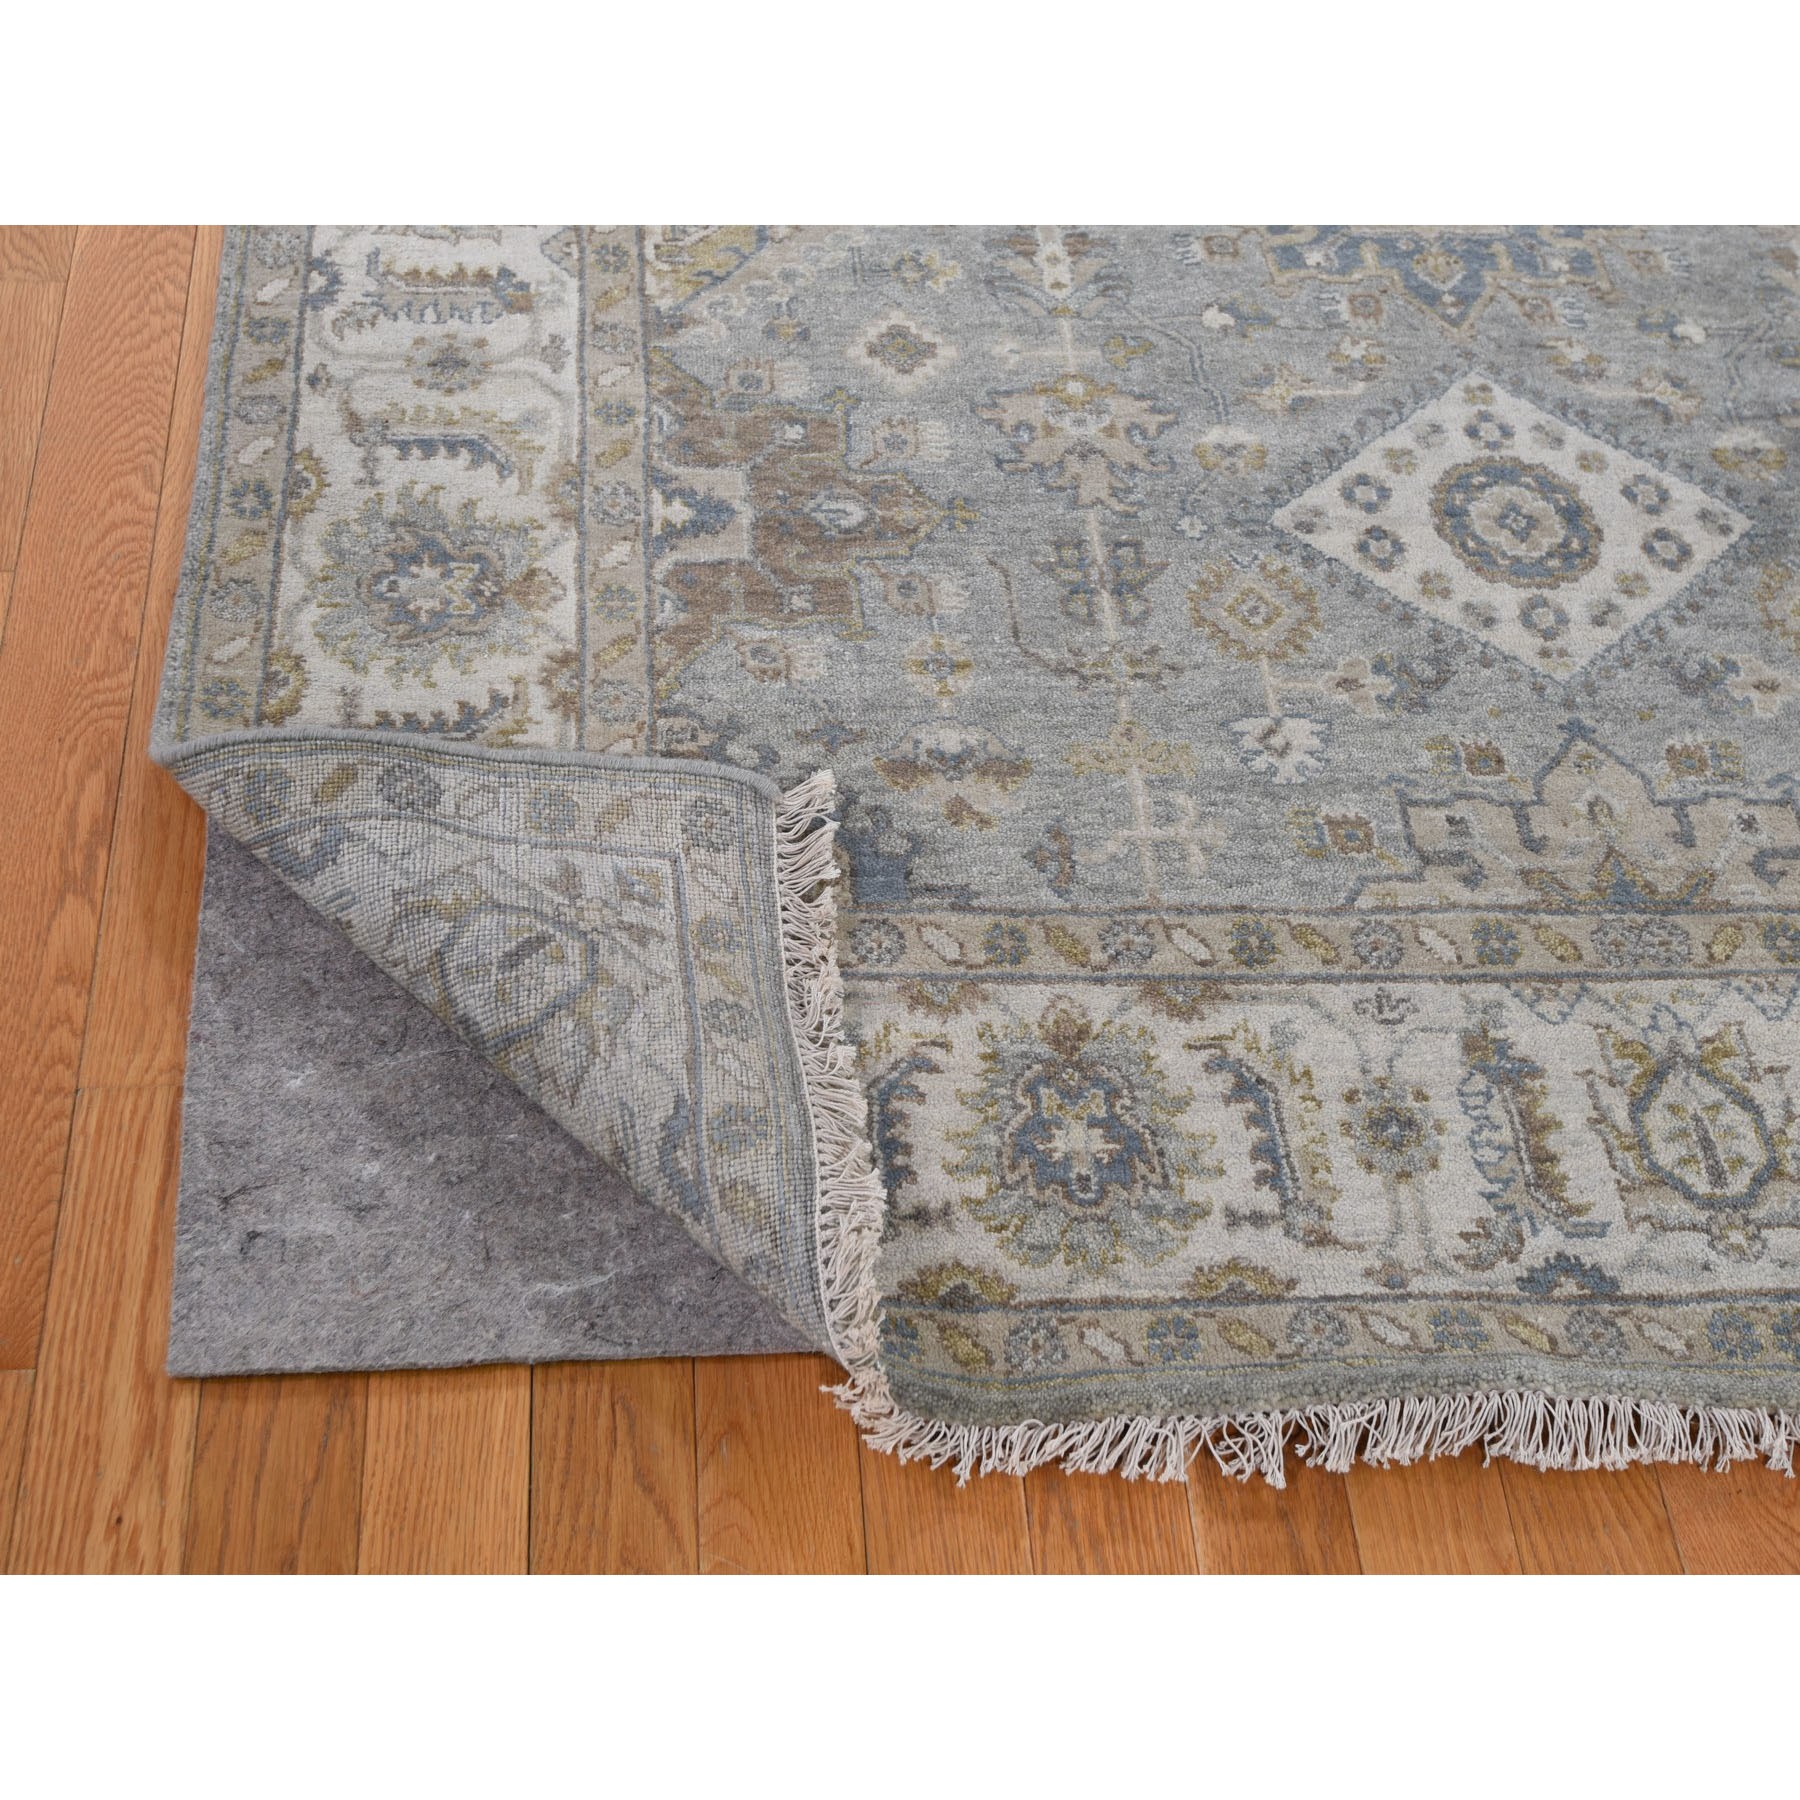 6-2 x6-2  Square Gray Karajeh Design Pure Wool Hand Knotted Oriental Rug 